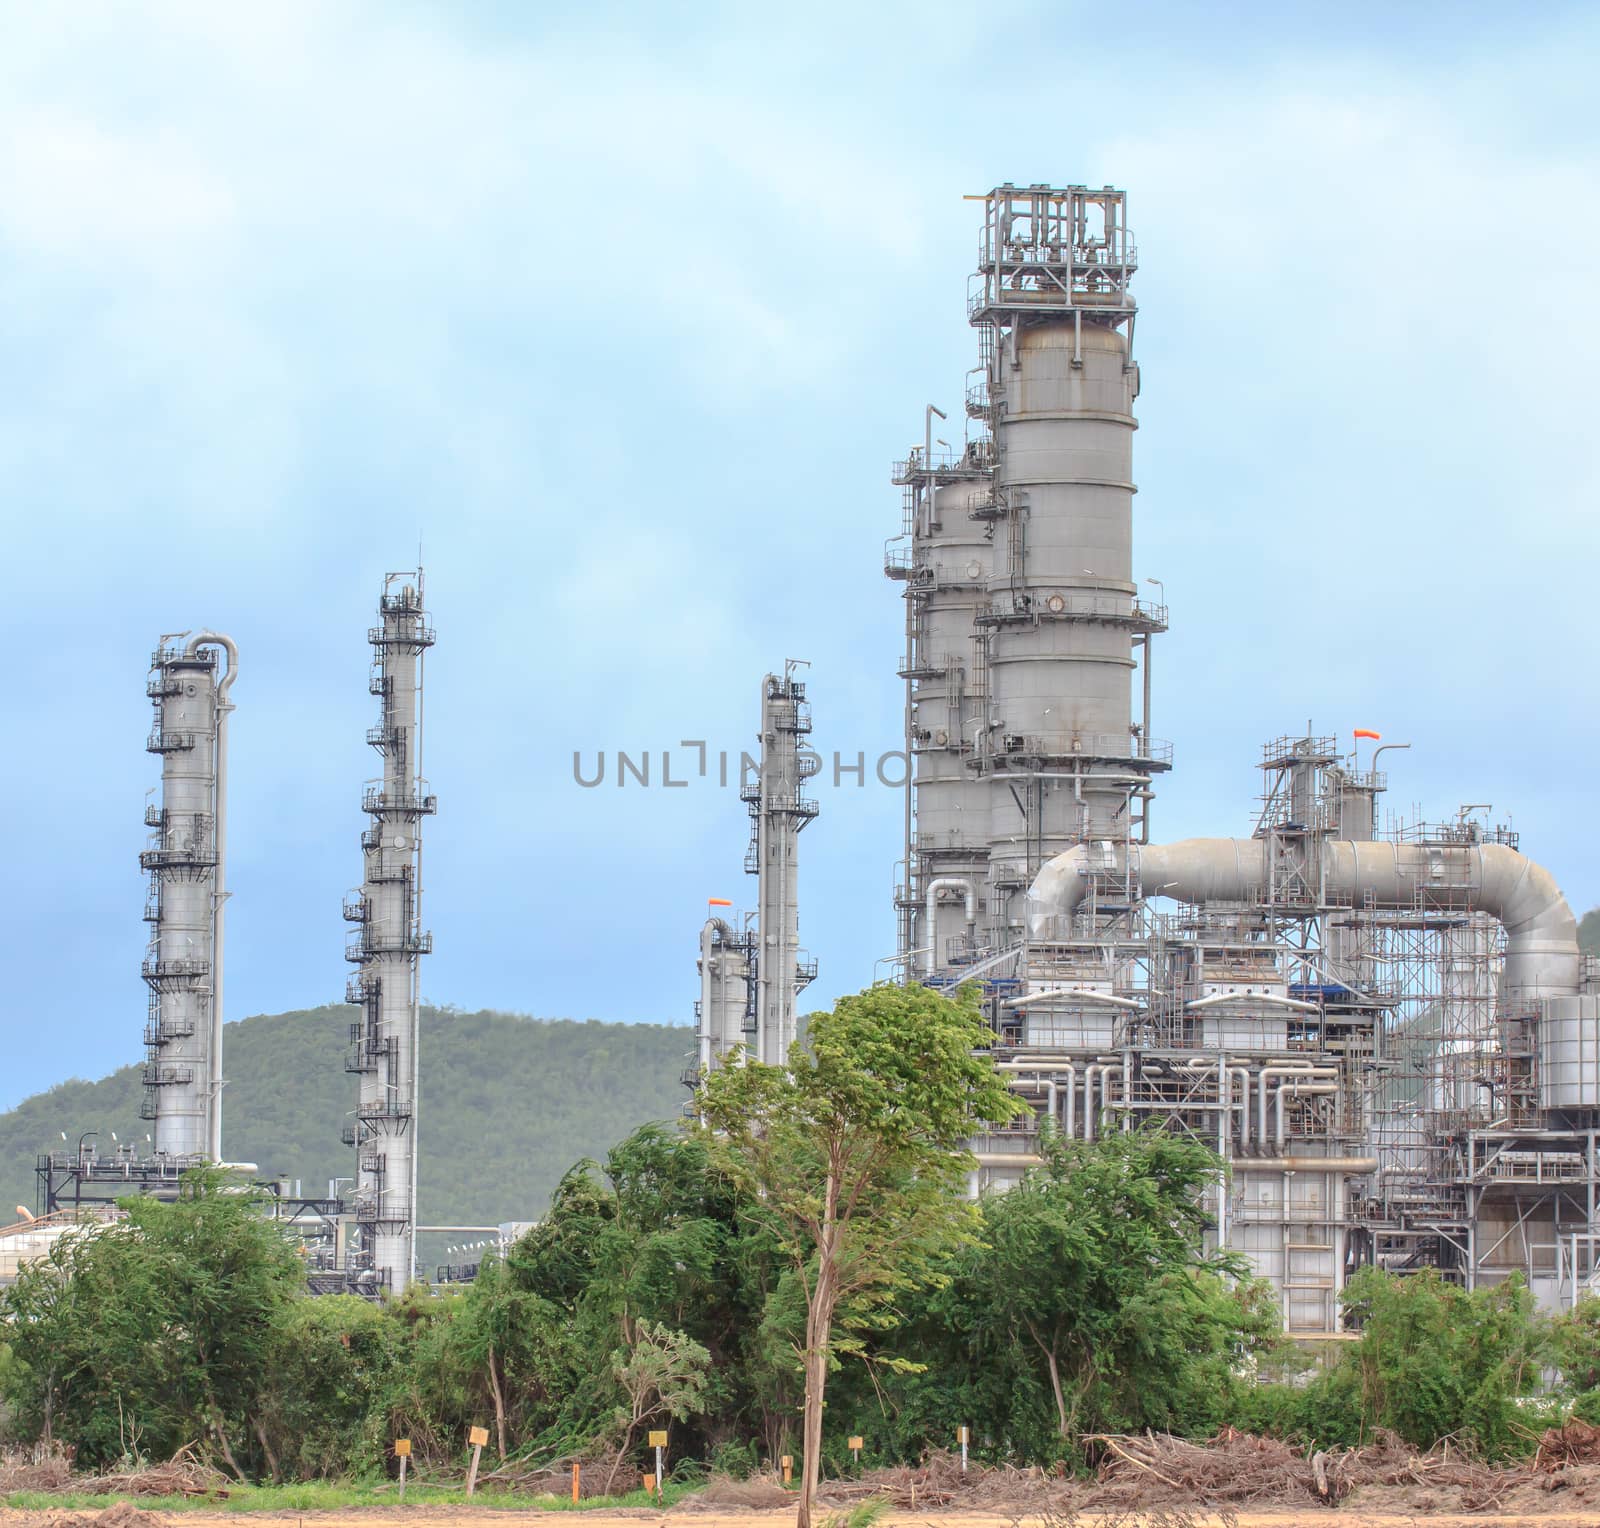 Oil refinery close to nature in thailand.